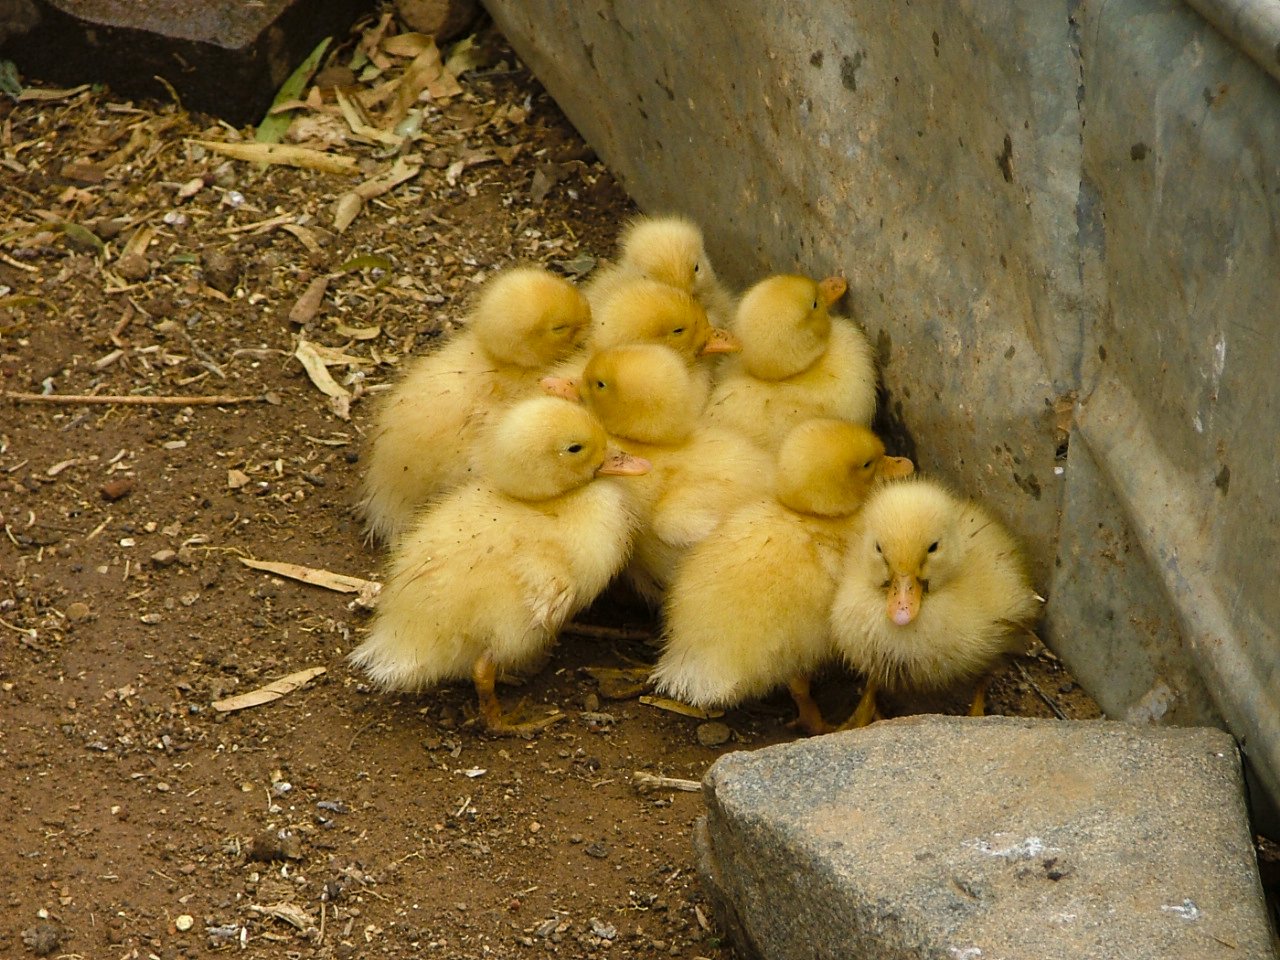 little yellow chickens sitting in the dirt next to a rock